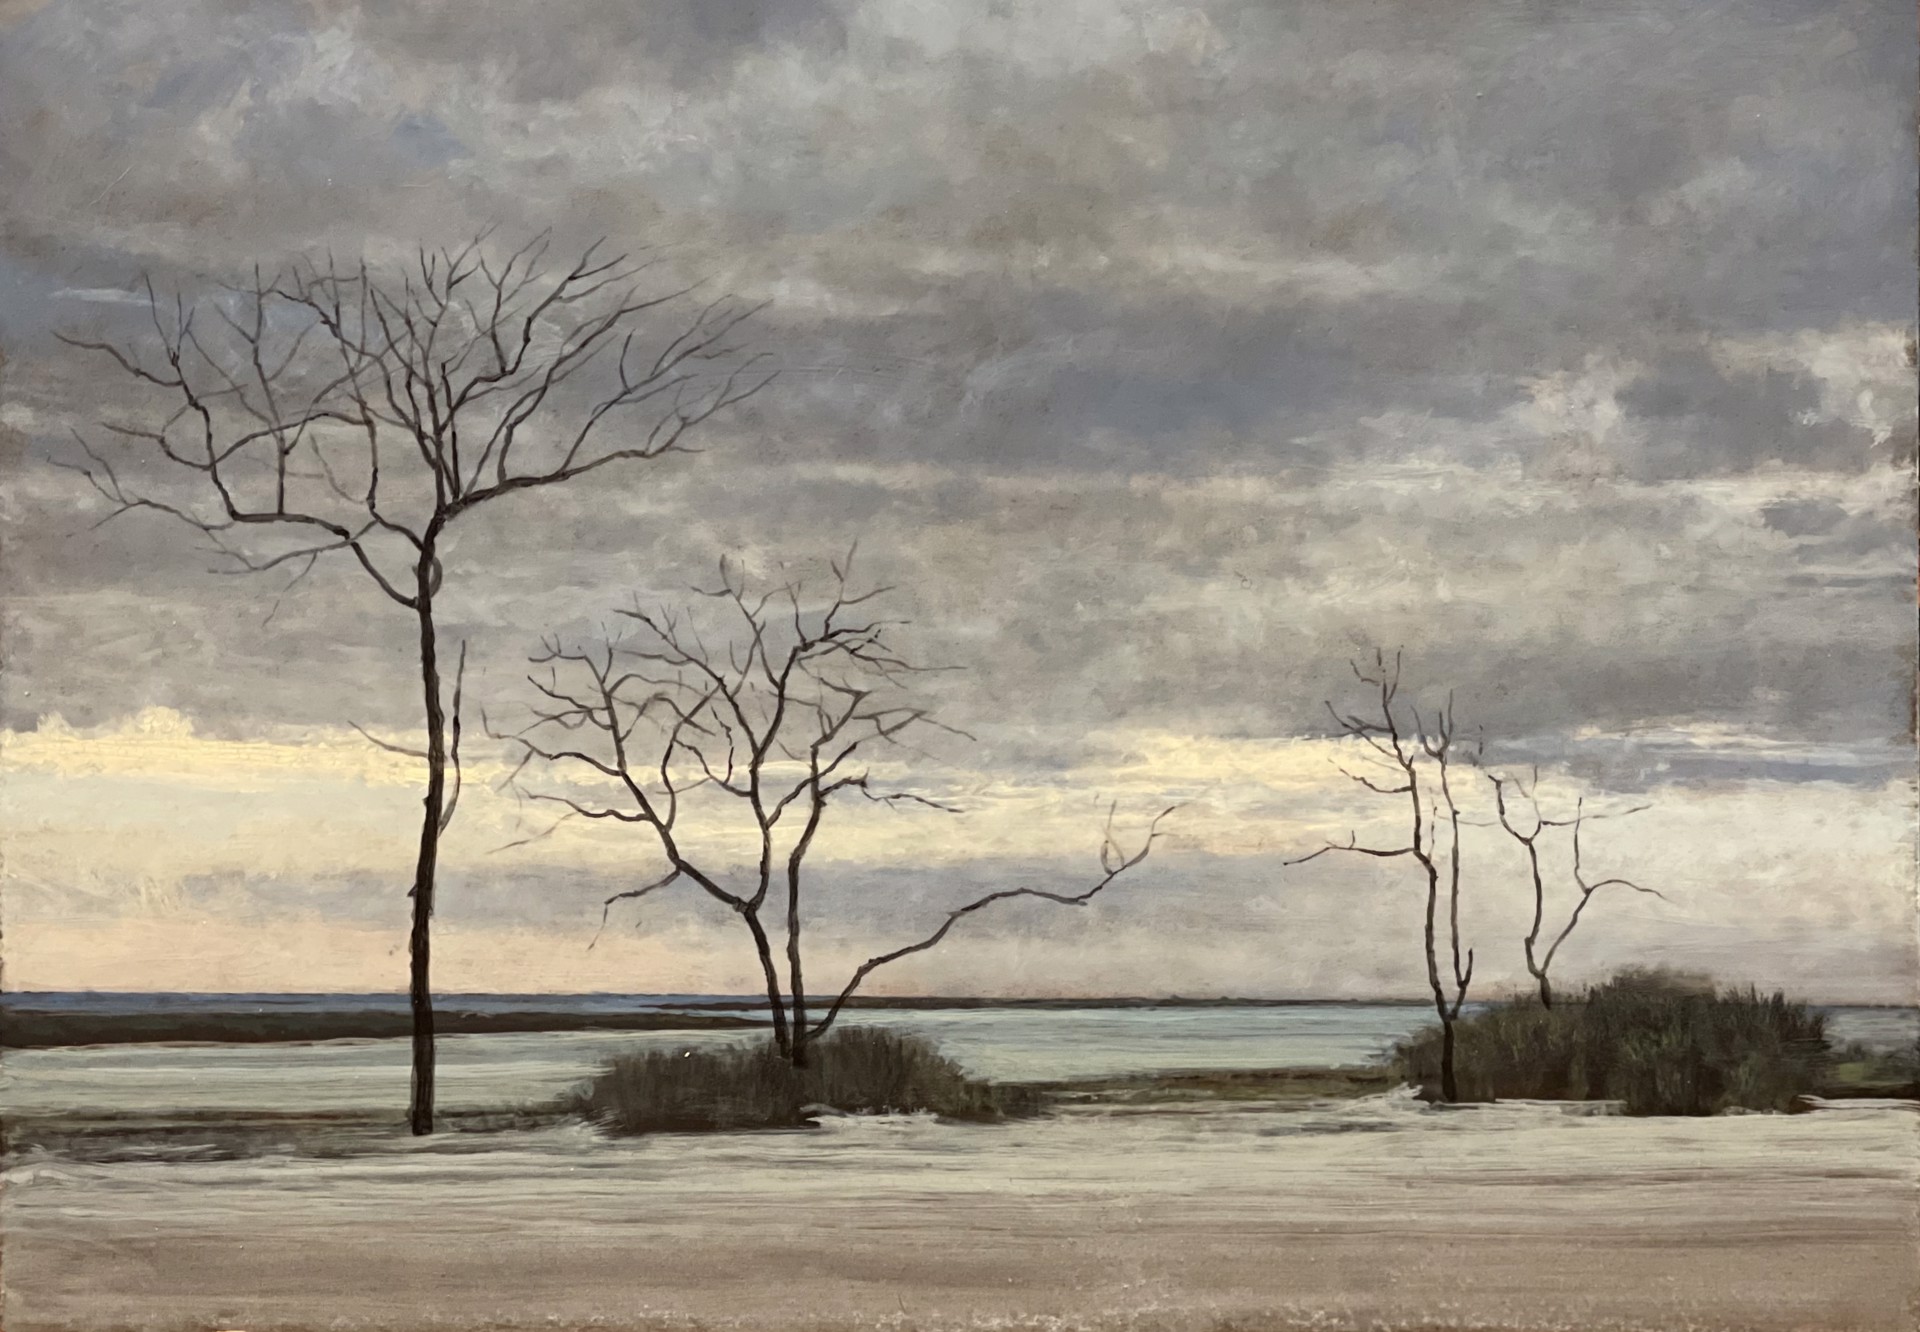 Bare Trees, Fort DeSoto by Jeff Aeling